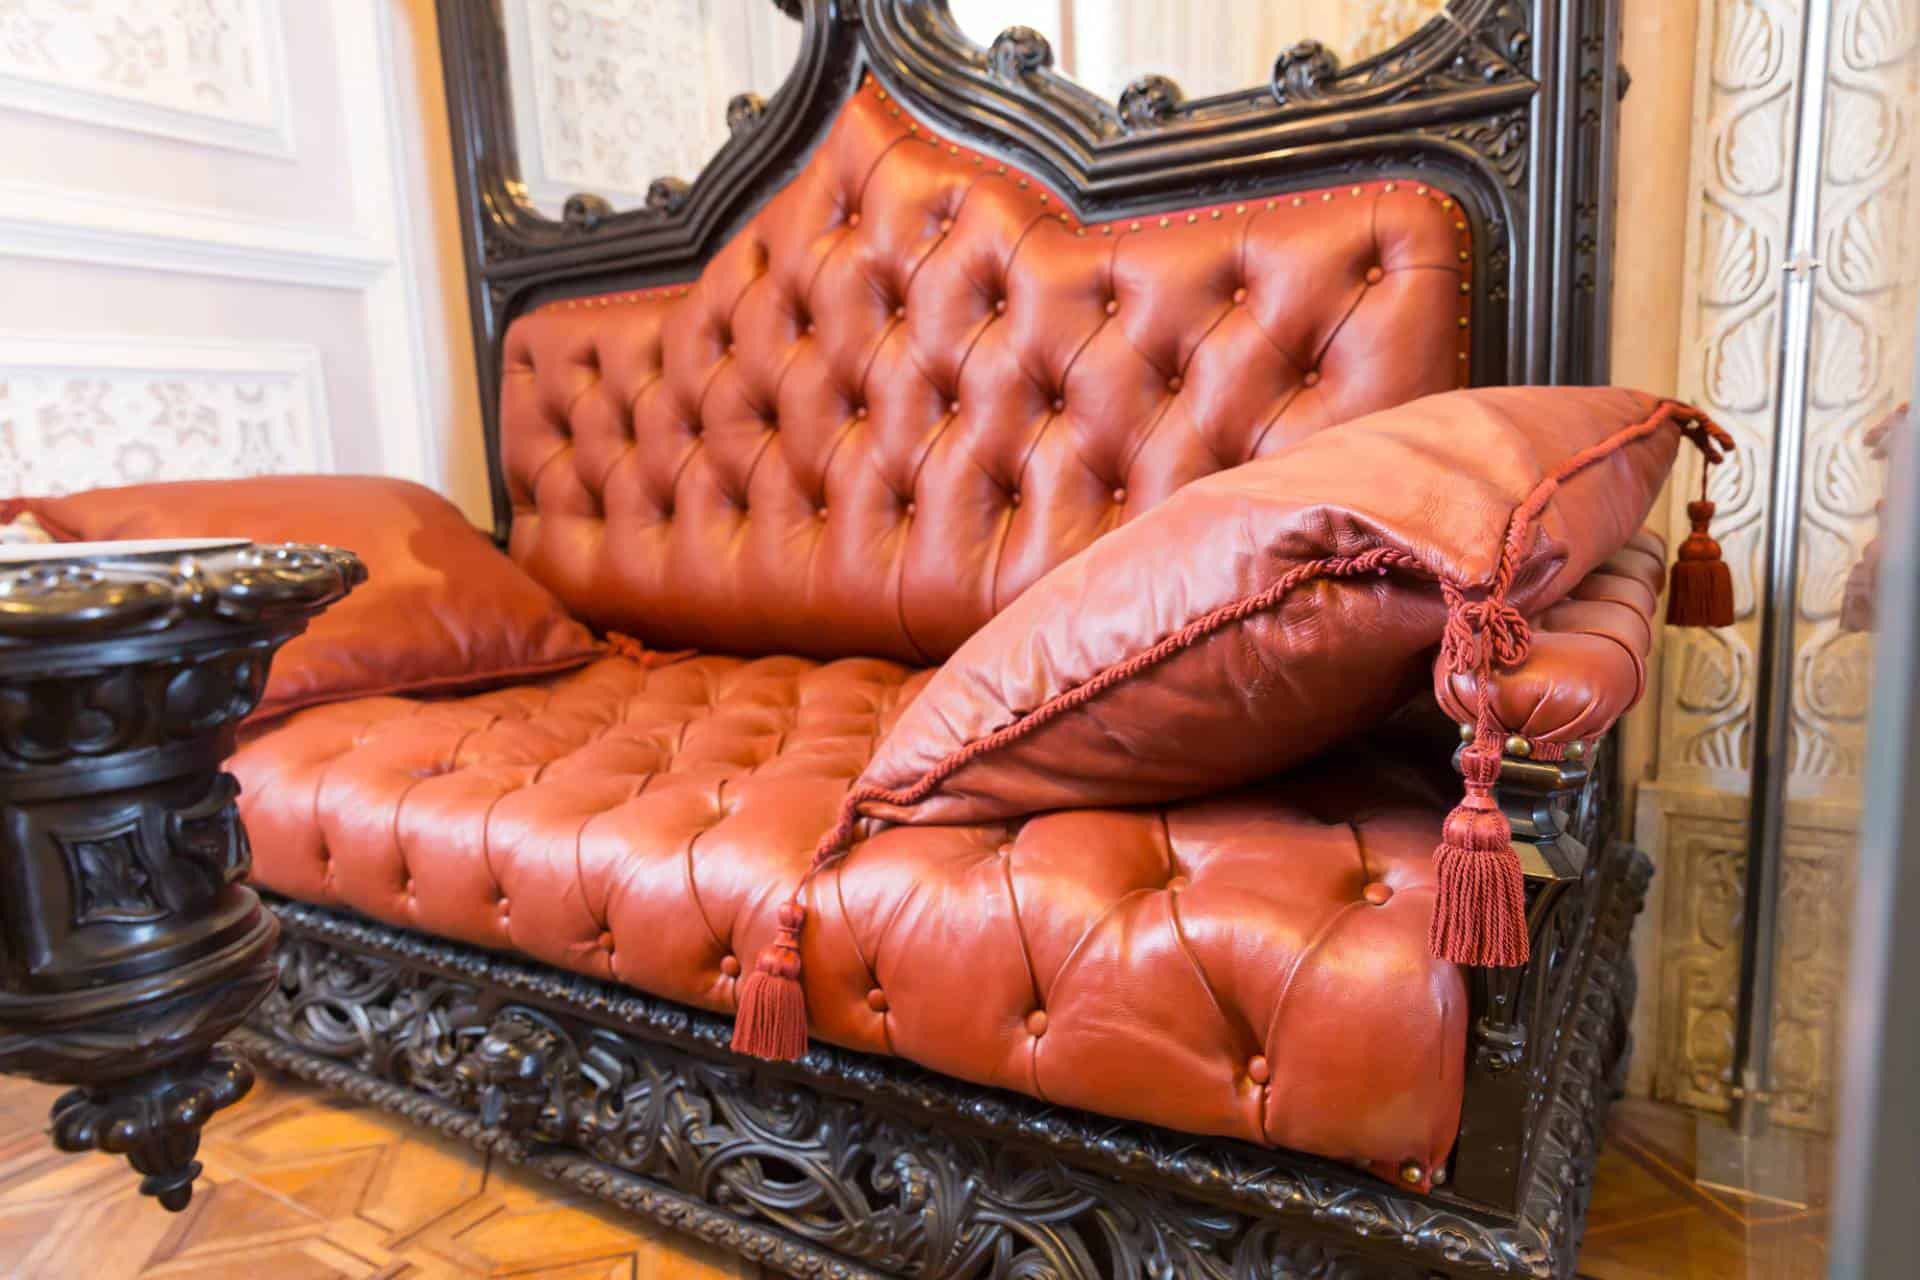 Luxurious, leather-covered sofa with pillows.